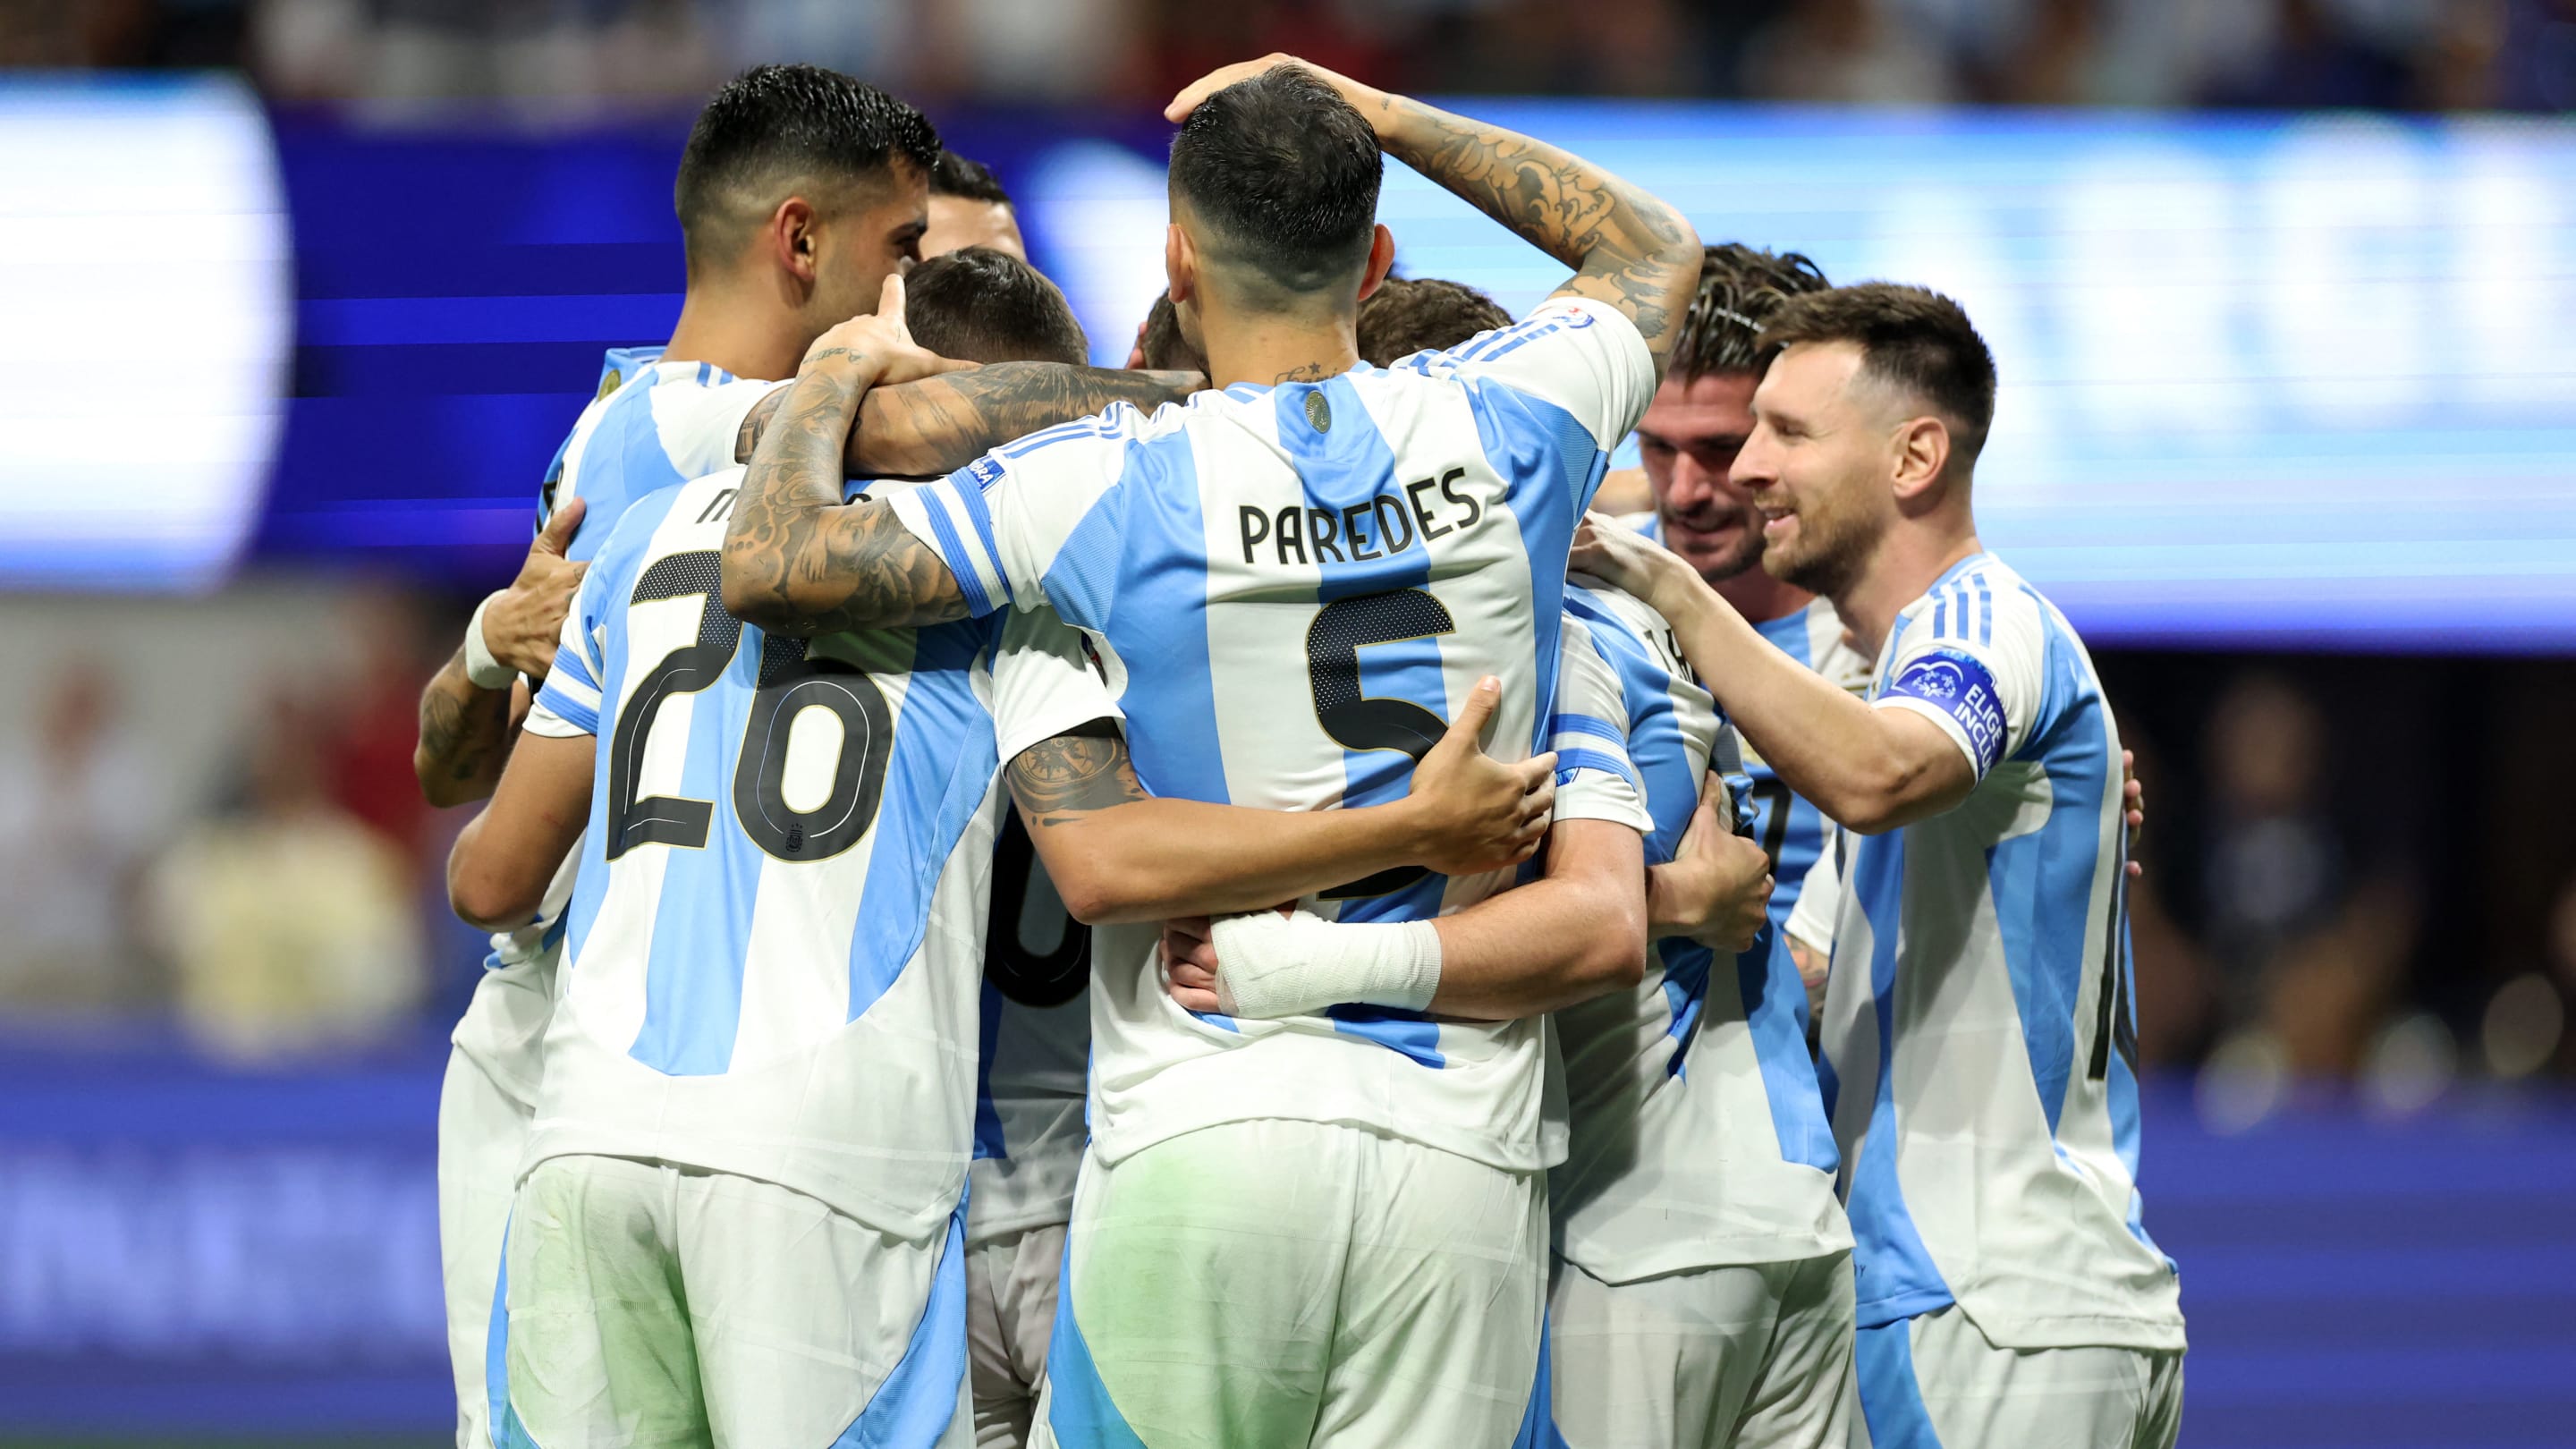 Argentina 2-0 Canada: Player ratings as reigning Copa America champions cruise past Canada